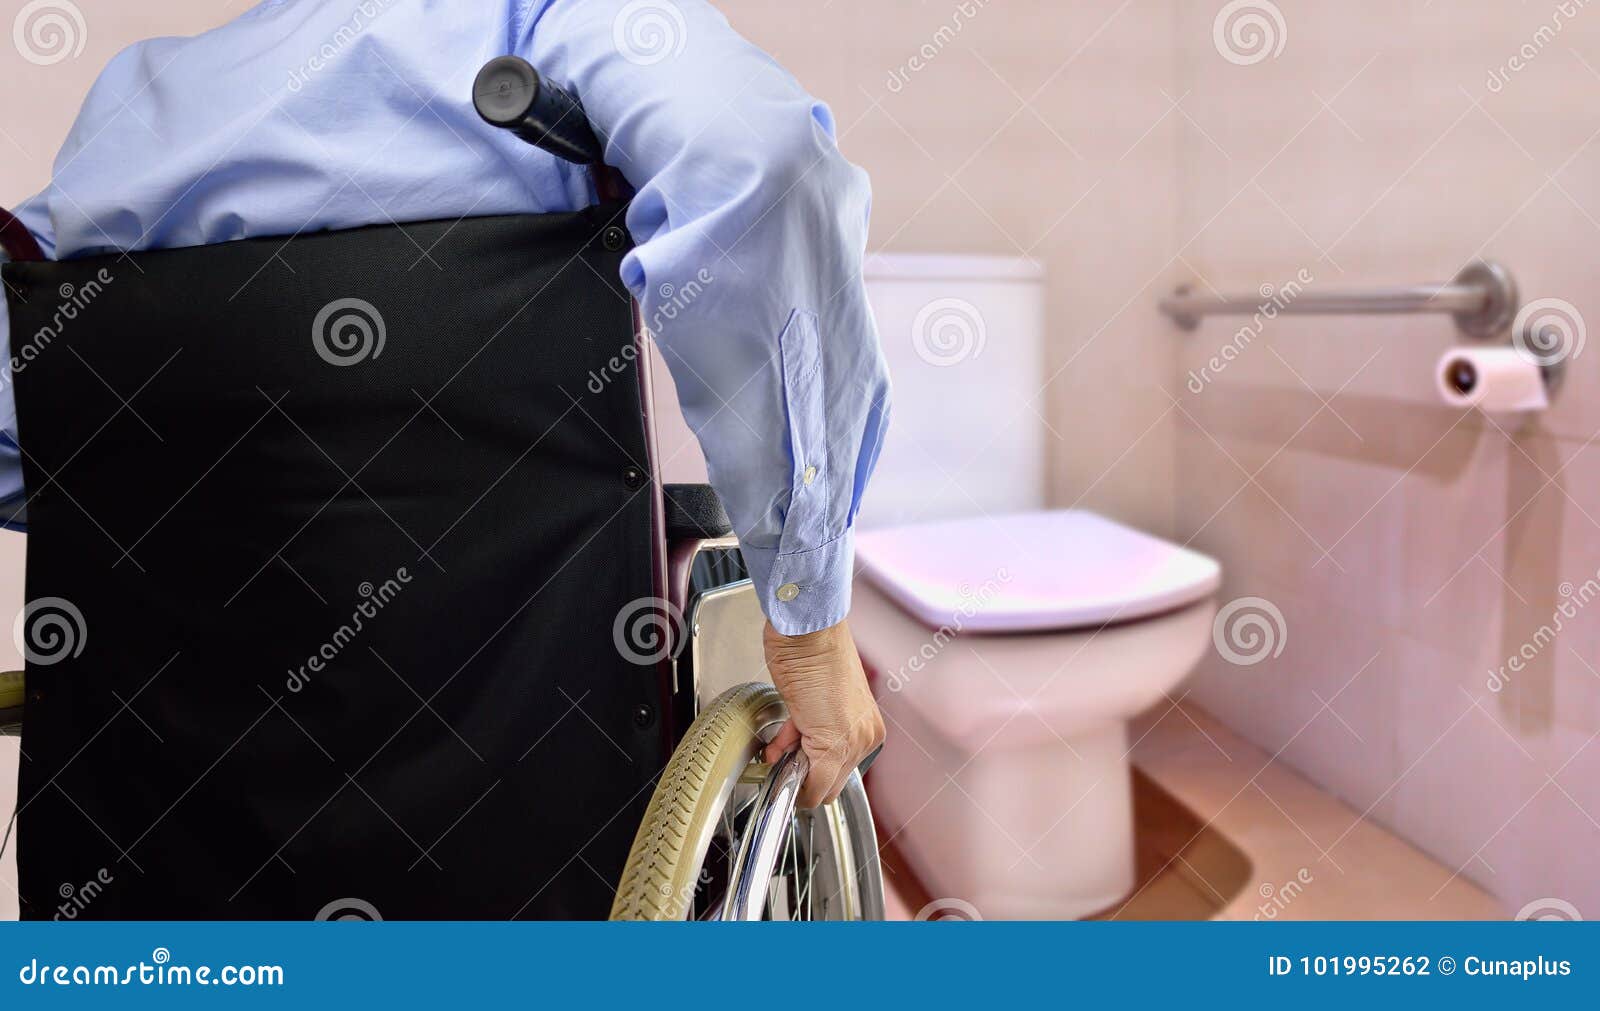 Restroom For Disability Person Stock Photo - Image of indoor, paralysis: 101995262